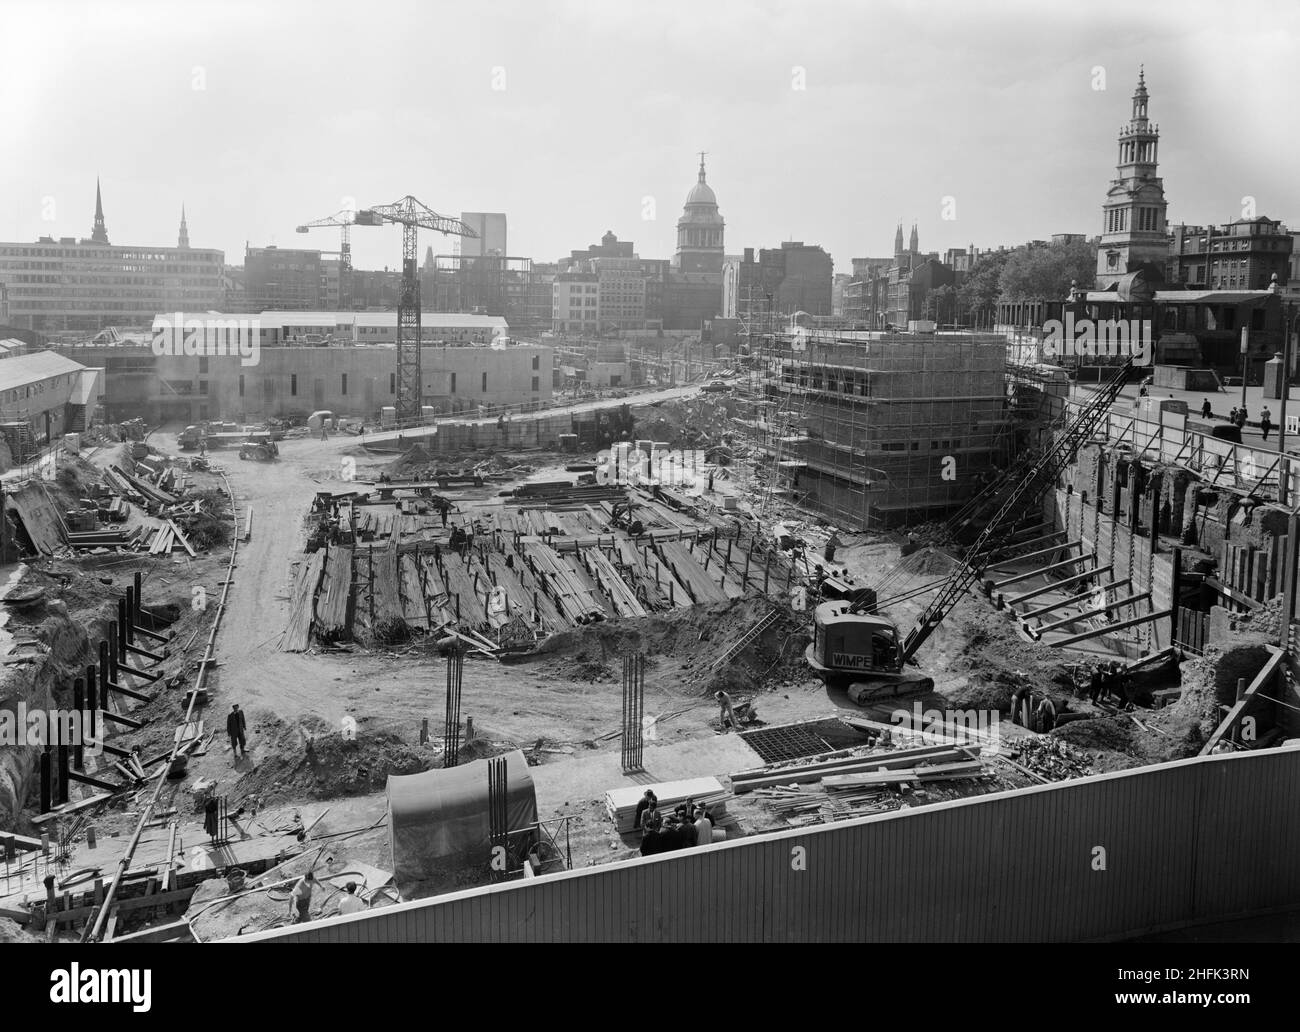 Paternoster Square, City of London, 04/06/1962. Looking west during the construction of the Paternoster development, showing the Old Bailey in the background and Christchurch Greyfriars on the right. Work on the Paternoster development was carried out in a joint venture by John Laing Construction Limited, Trollope and Colls Limited, and George Wimpey and Company Limited. The scheme involved the redevelopment of a seven acre site on the north side of St Paul&#x2019;s Cathedral. The site had been almost entirely devastated during an incendiary raid in December 1940. The development consisted of Stock Photo